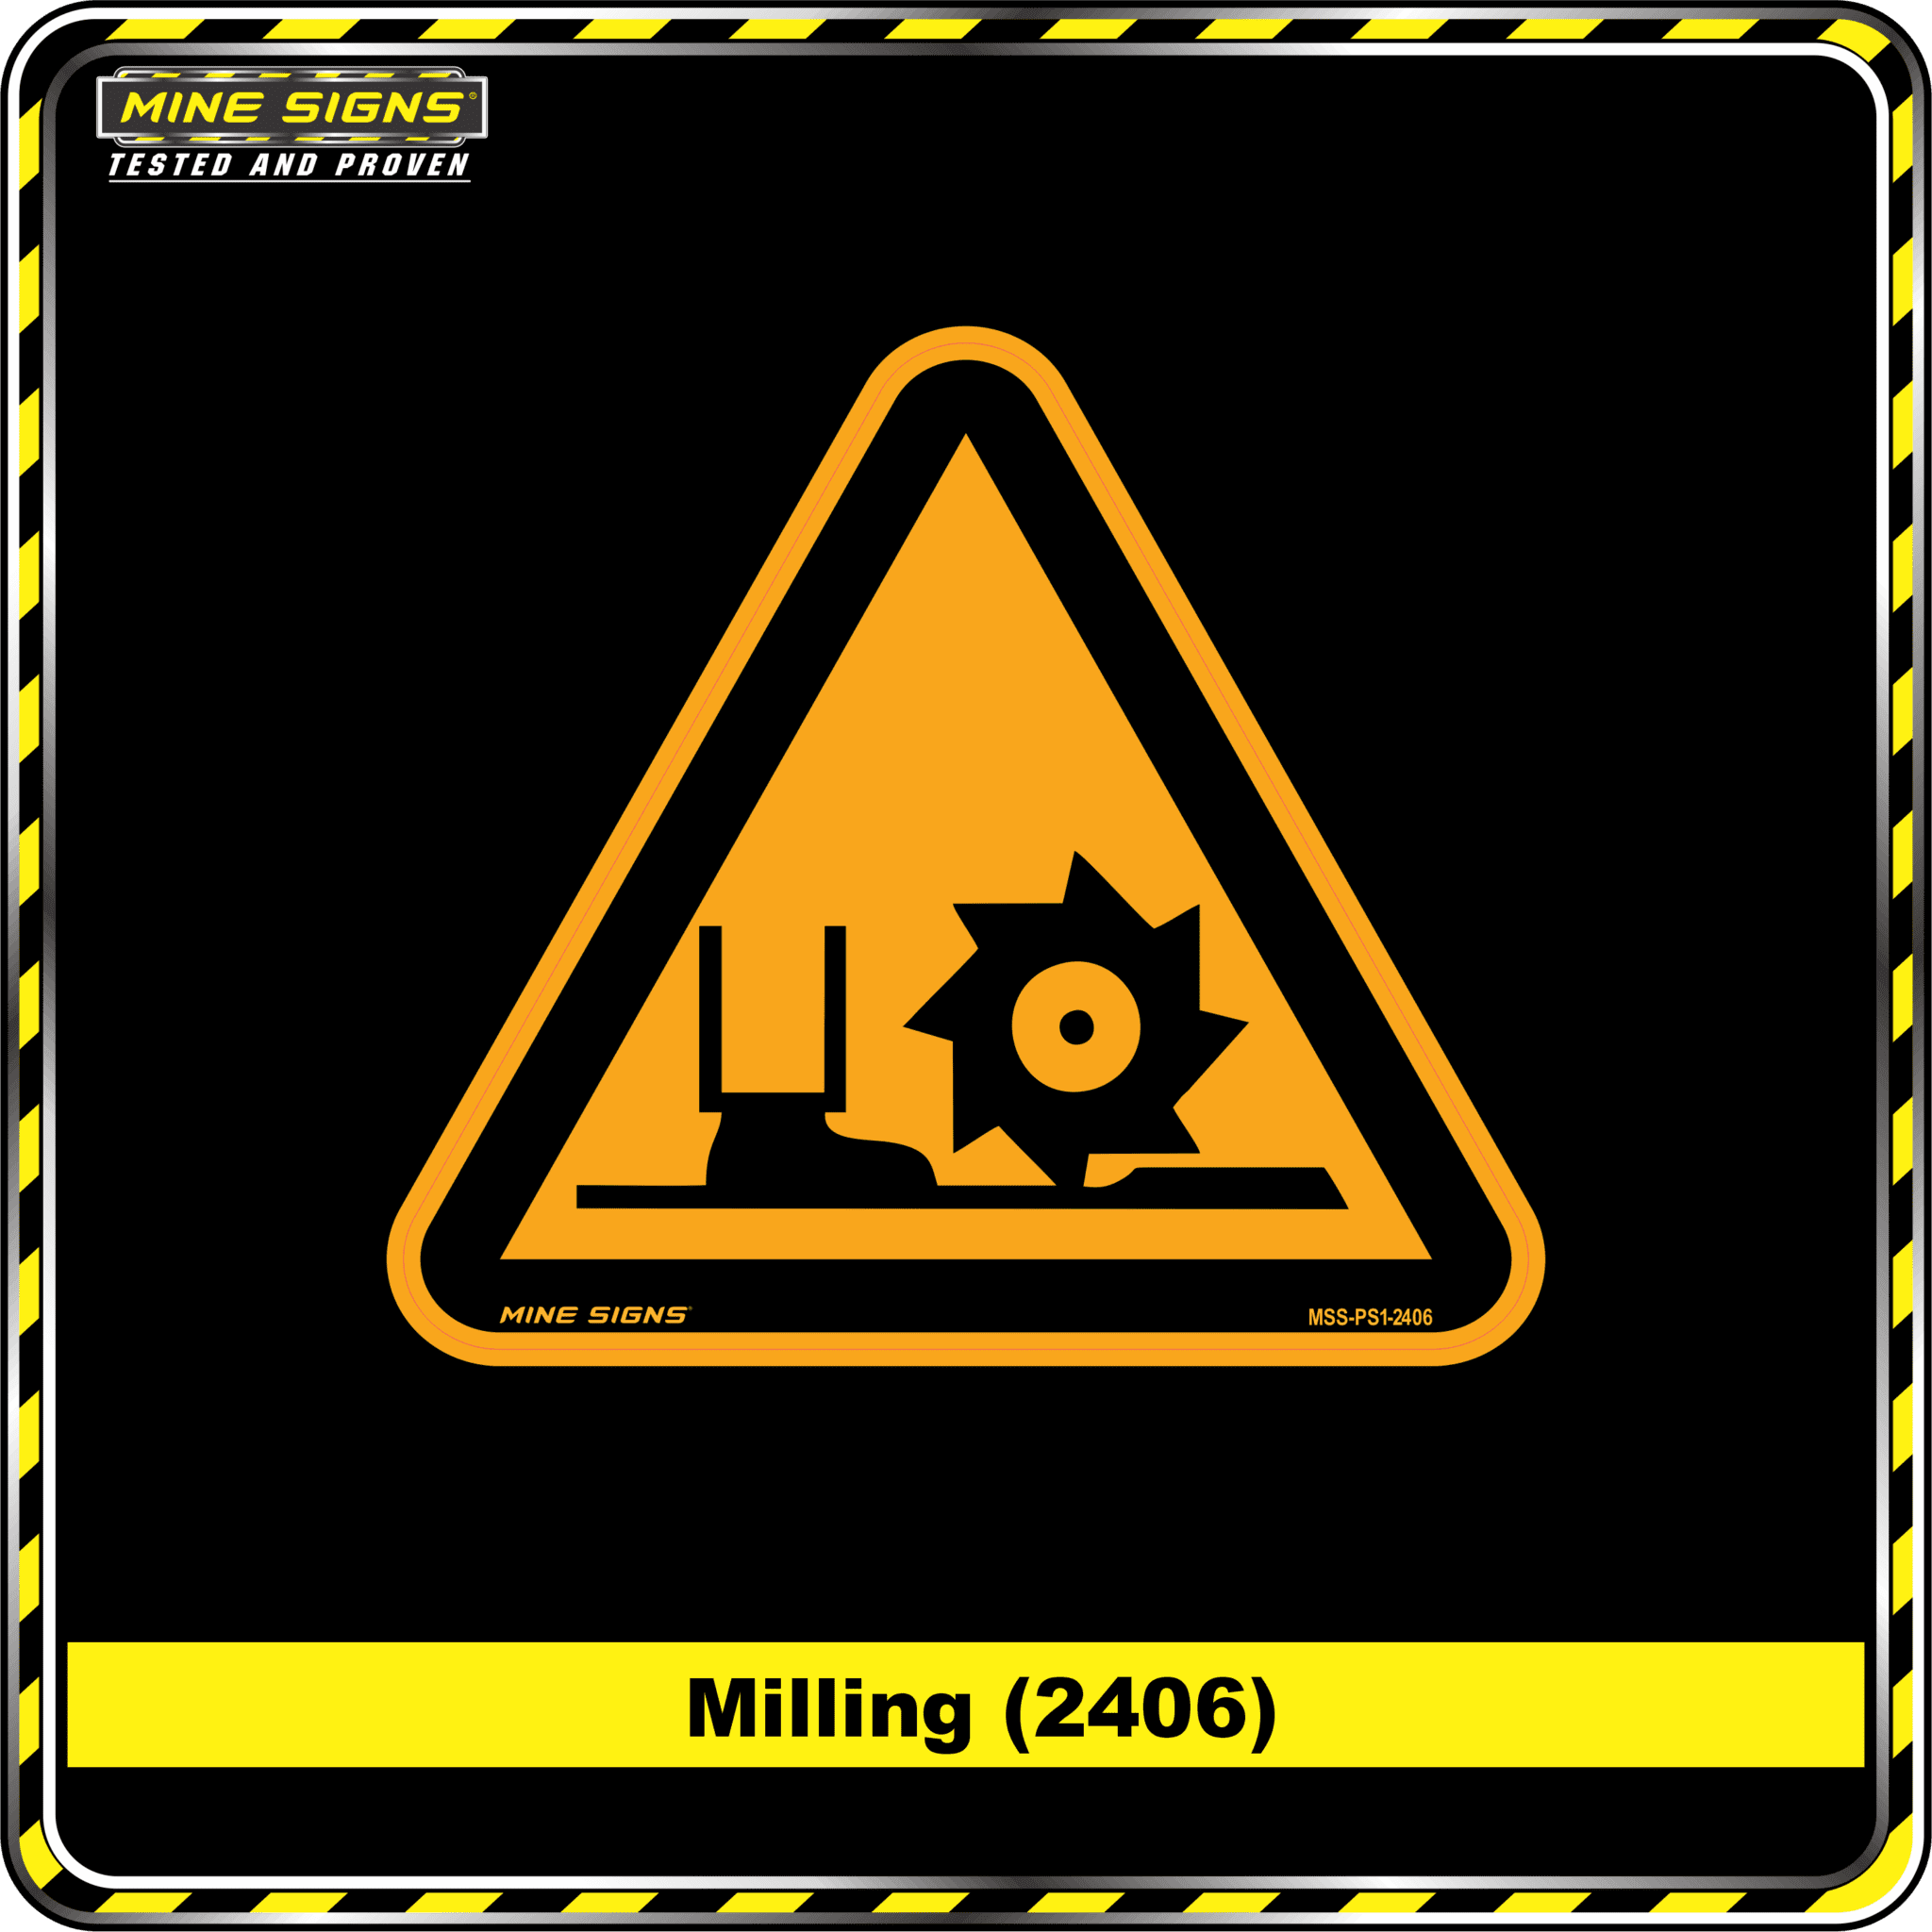 MS - Product Background - Safety Signs - Milling 2406